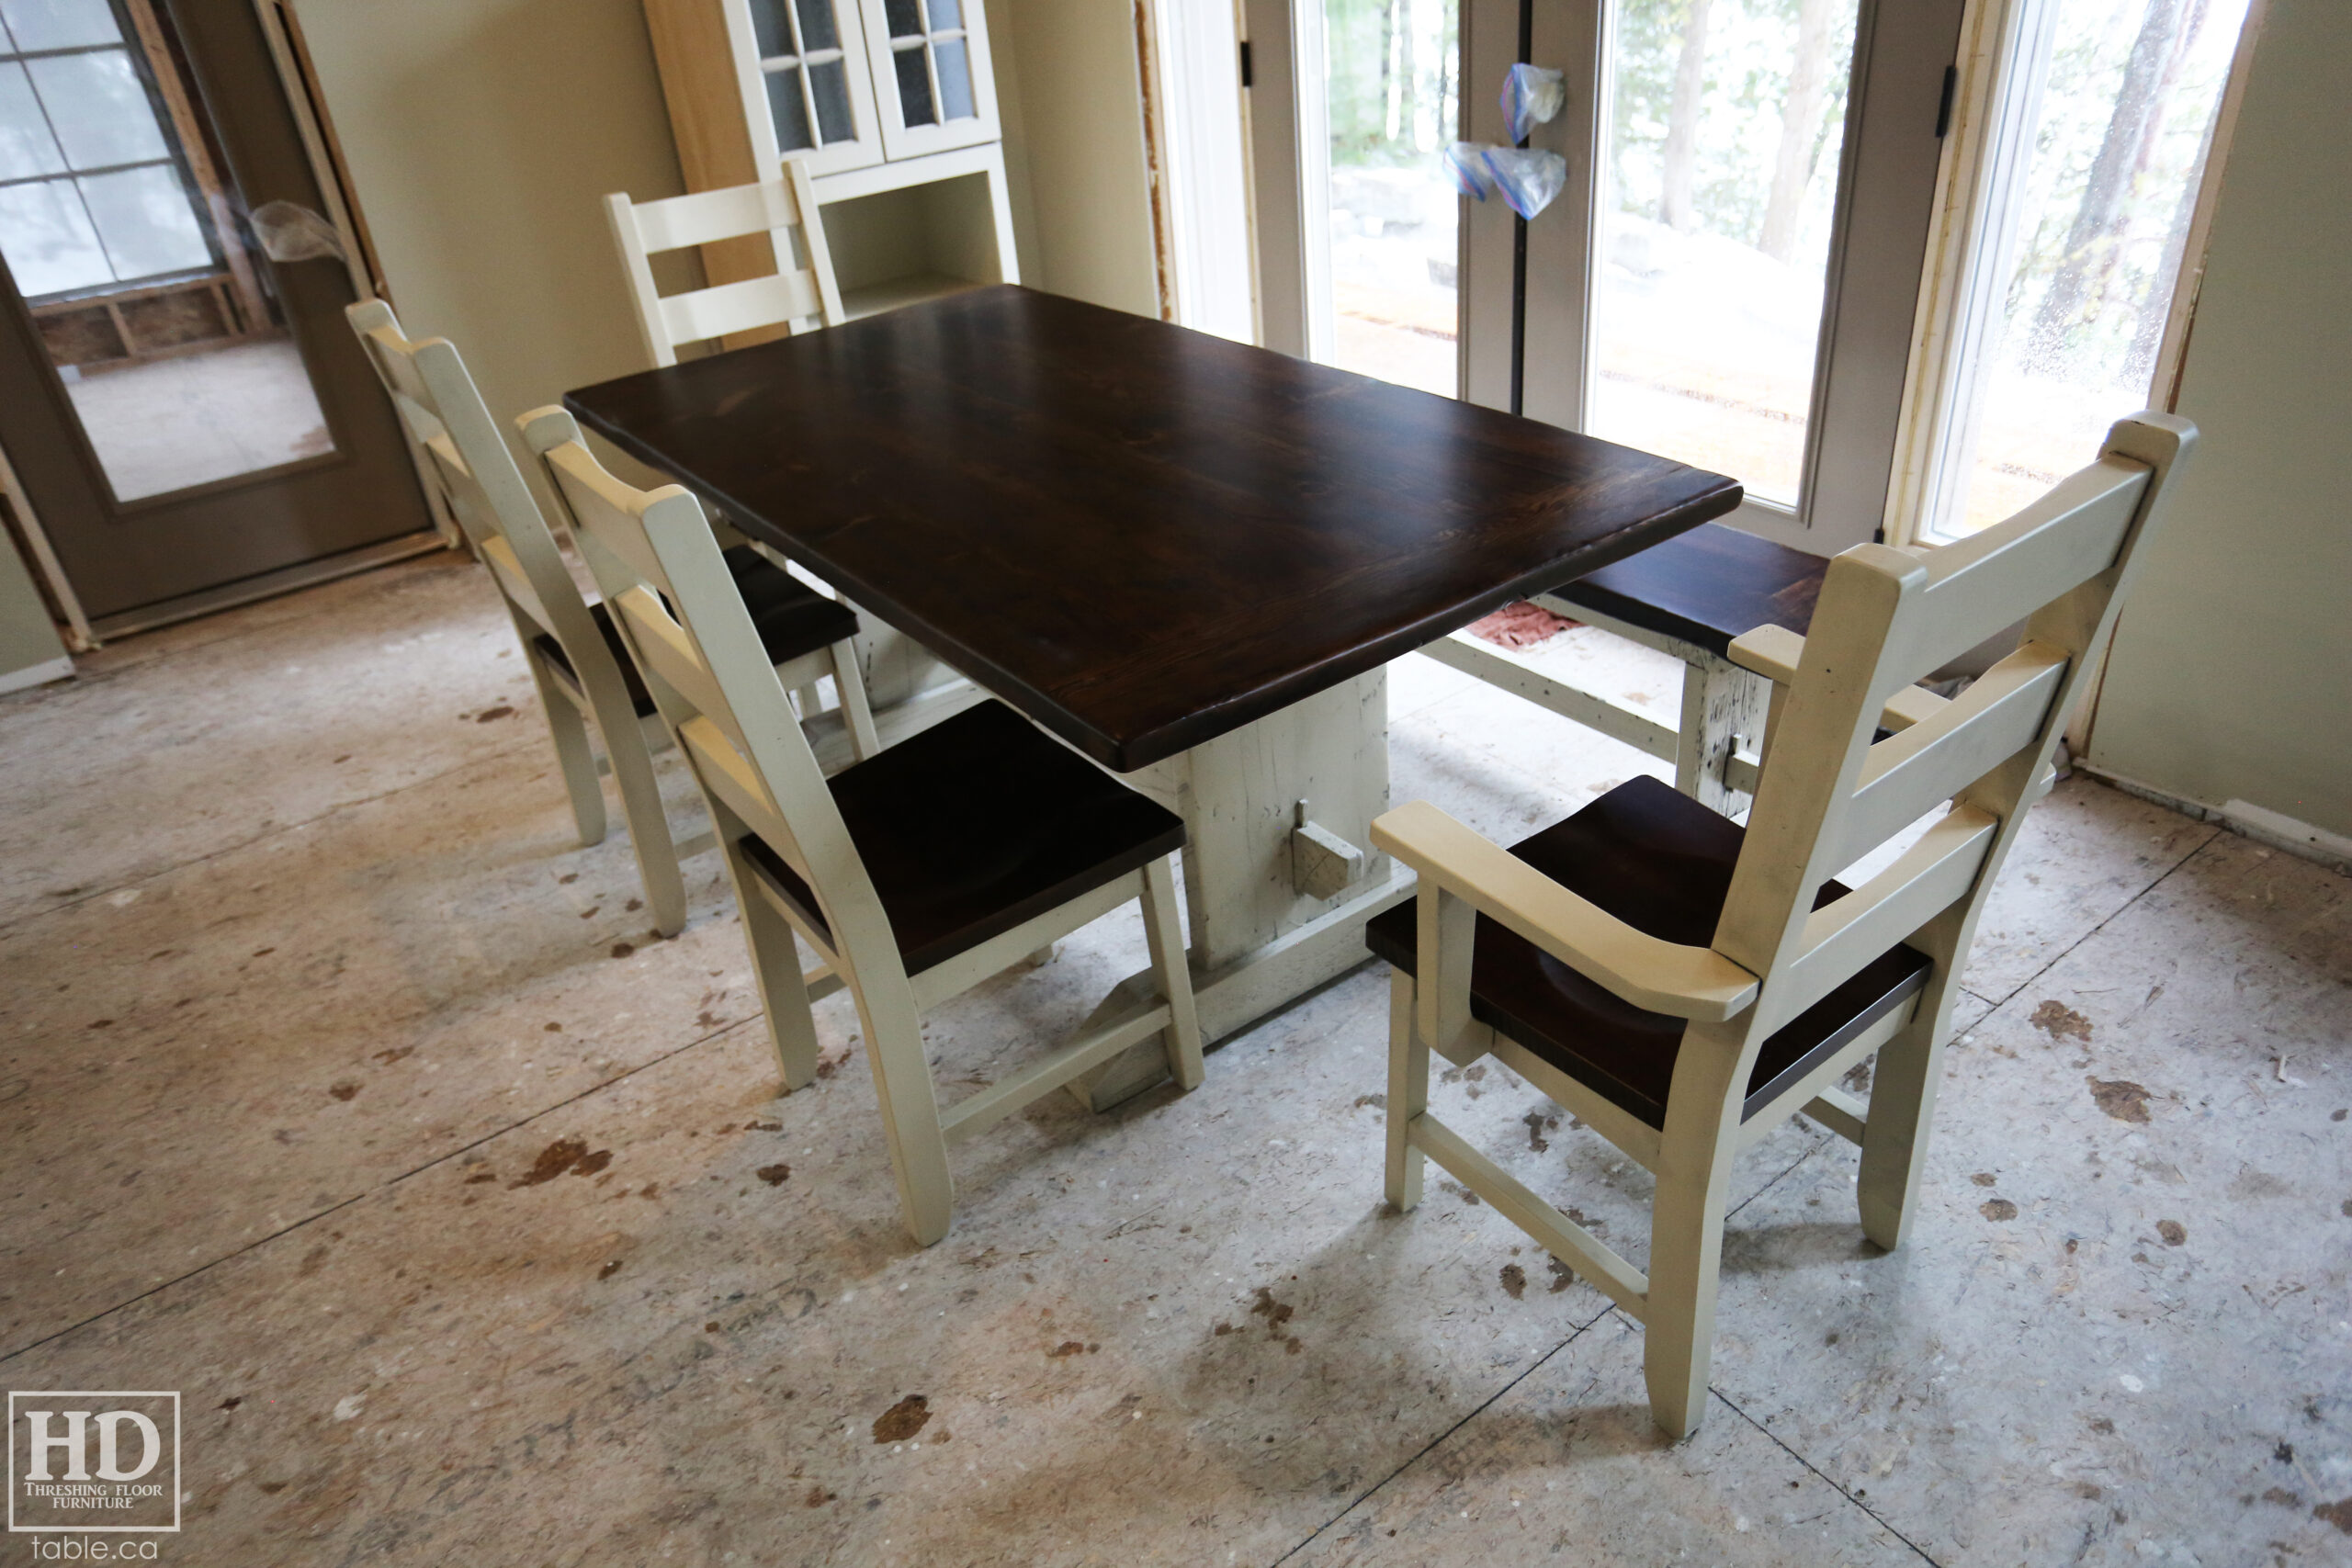 Reclaimed Wood Table & Bench with Black Stain Treatment Option & Custom Finished Base & Ladder Back Chairs by HD Threshing Floor Furniture / www.table.ca